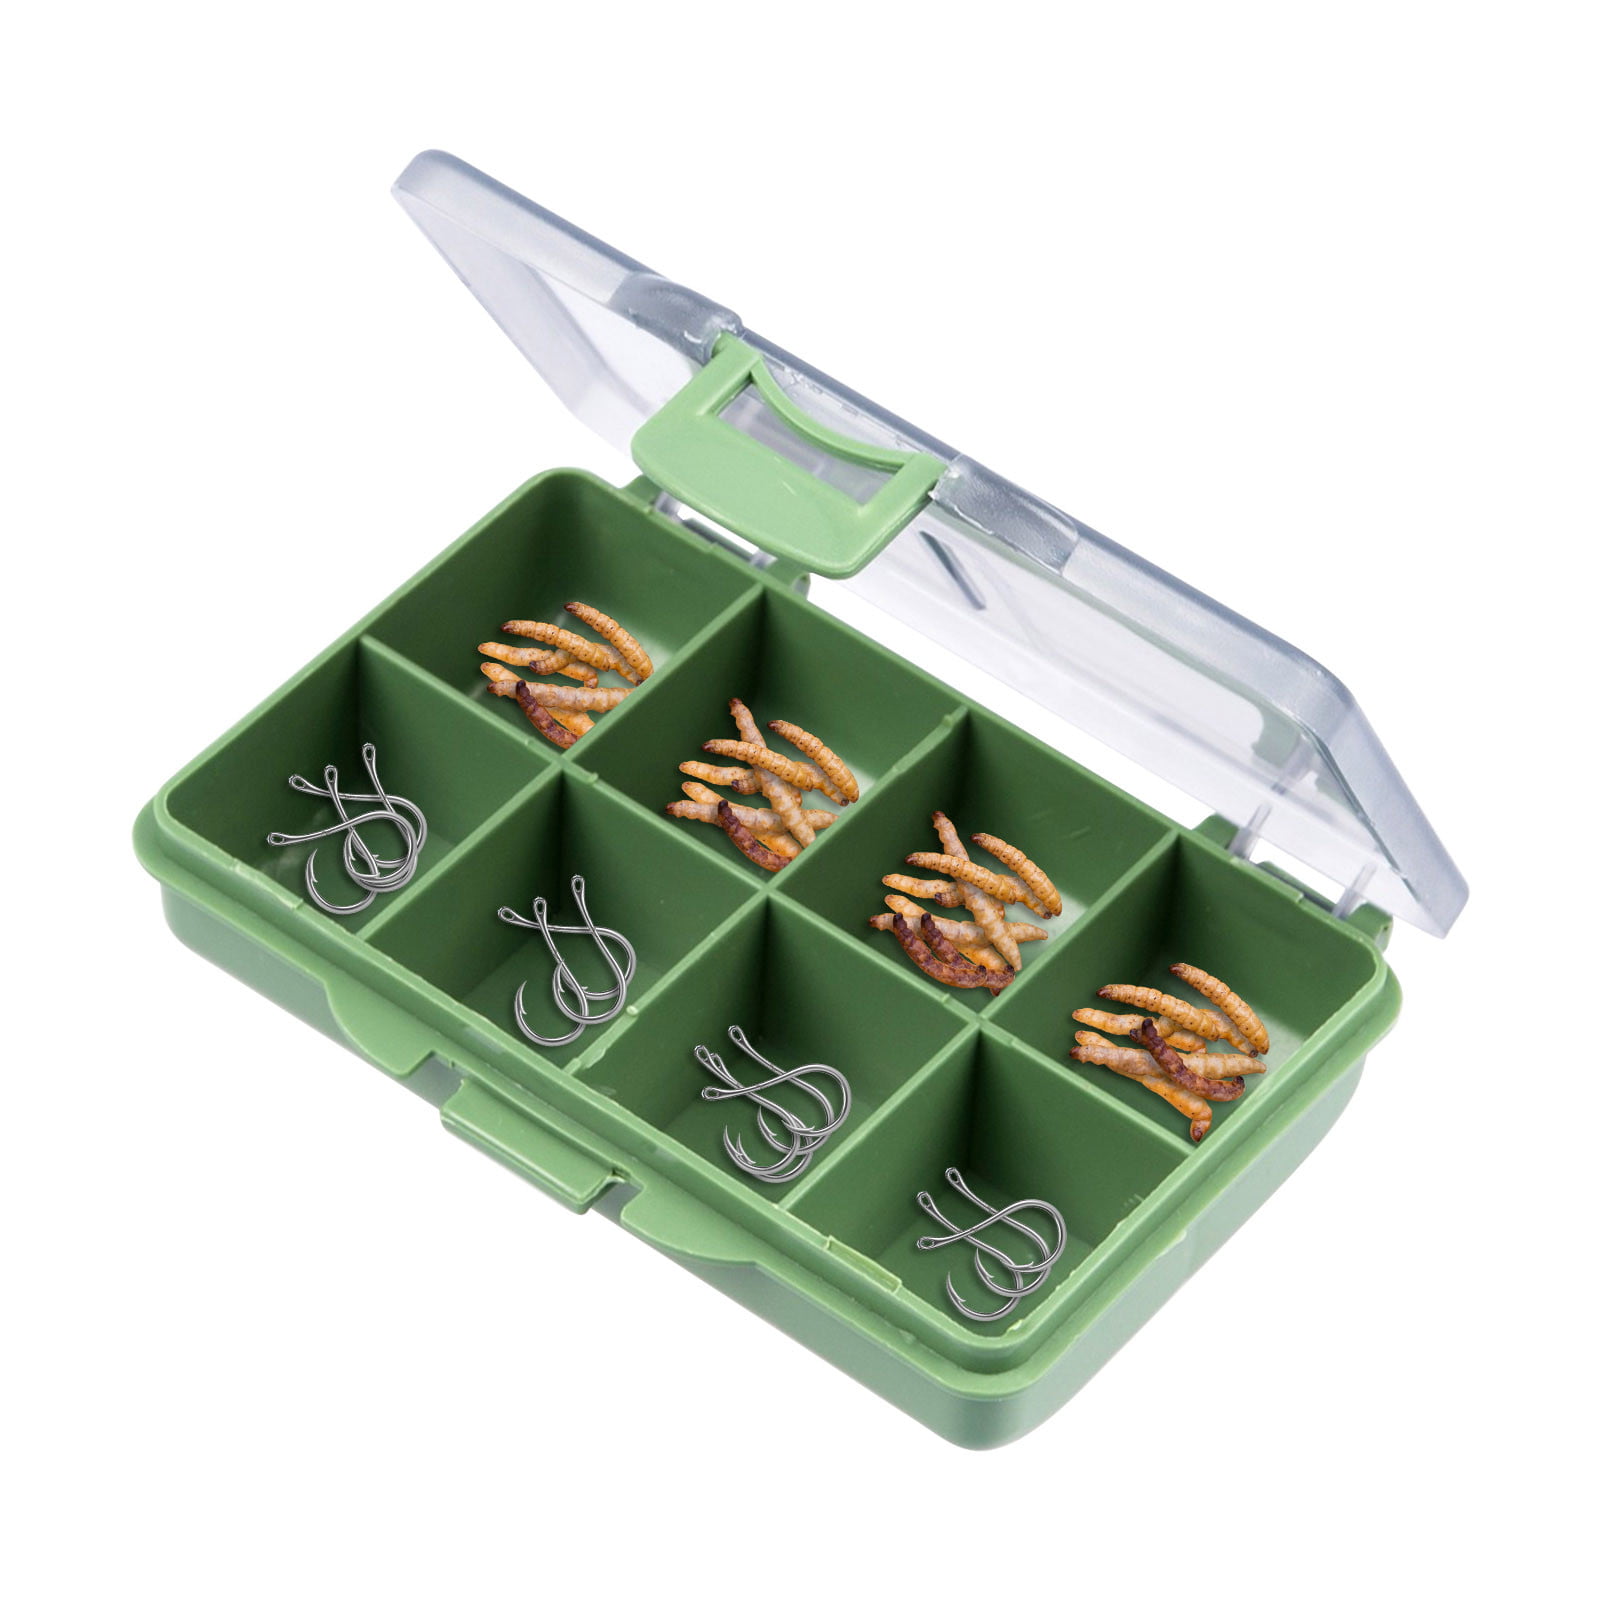 Vatenick Small Fishing Storage Box,Portable Case Hooks Lure Baits Storage Box Containers,10 Compartment Storage Case Multifunctional Mini Tackle Box